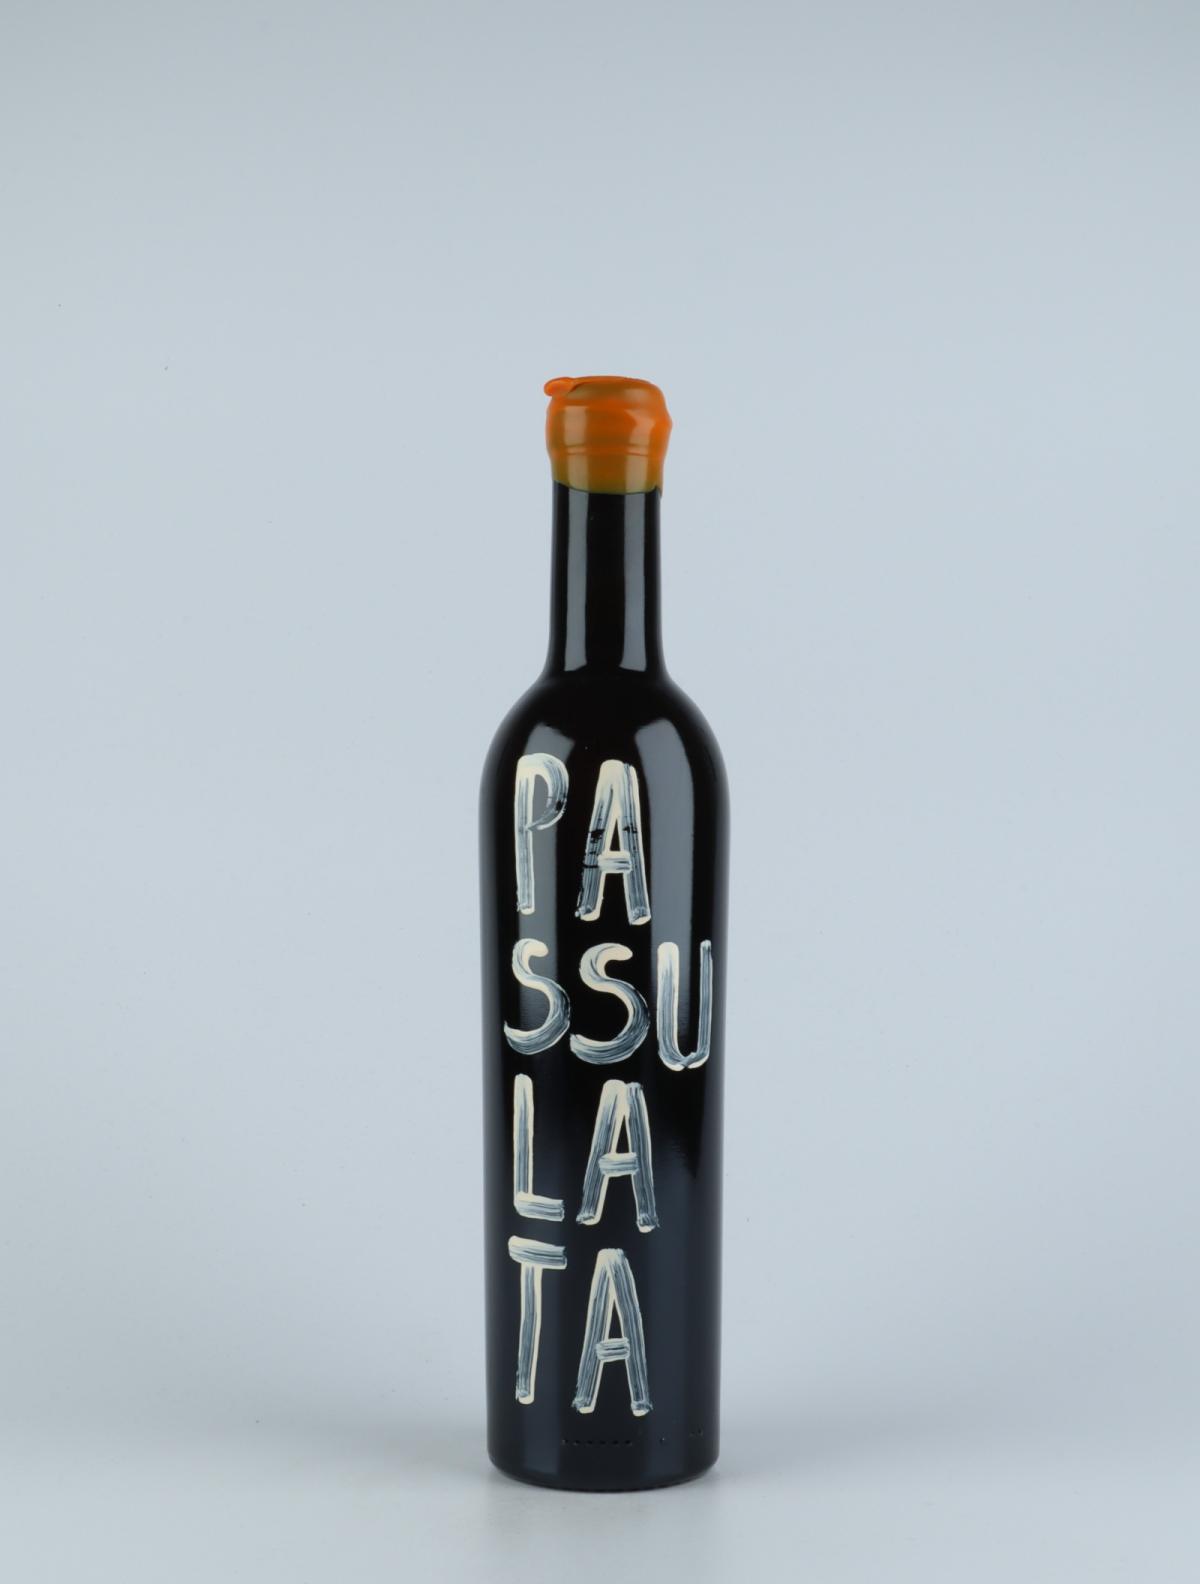 A bottle 2019 Passulata Sweet wine from Tanca Nica, Sicily in Italy